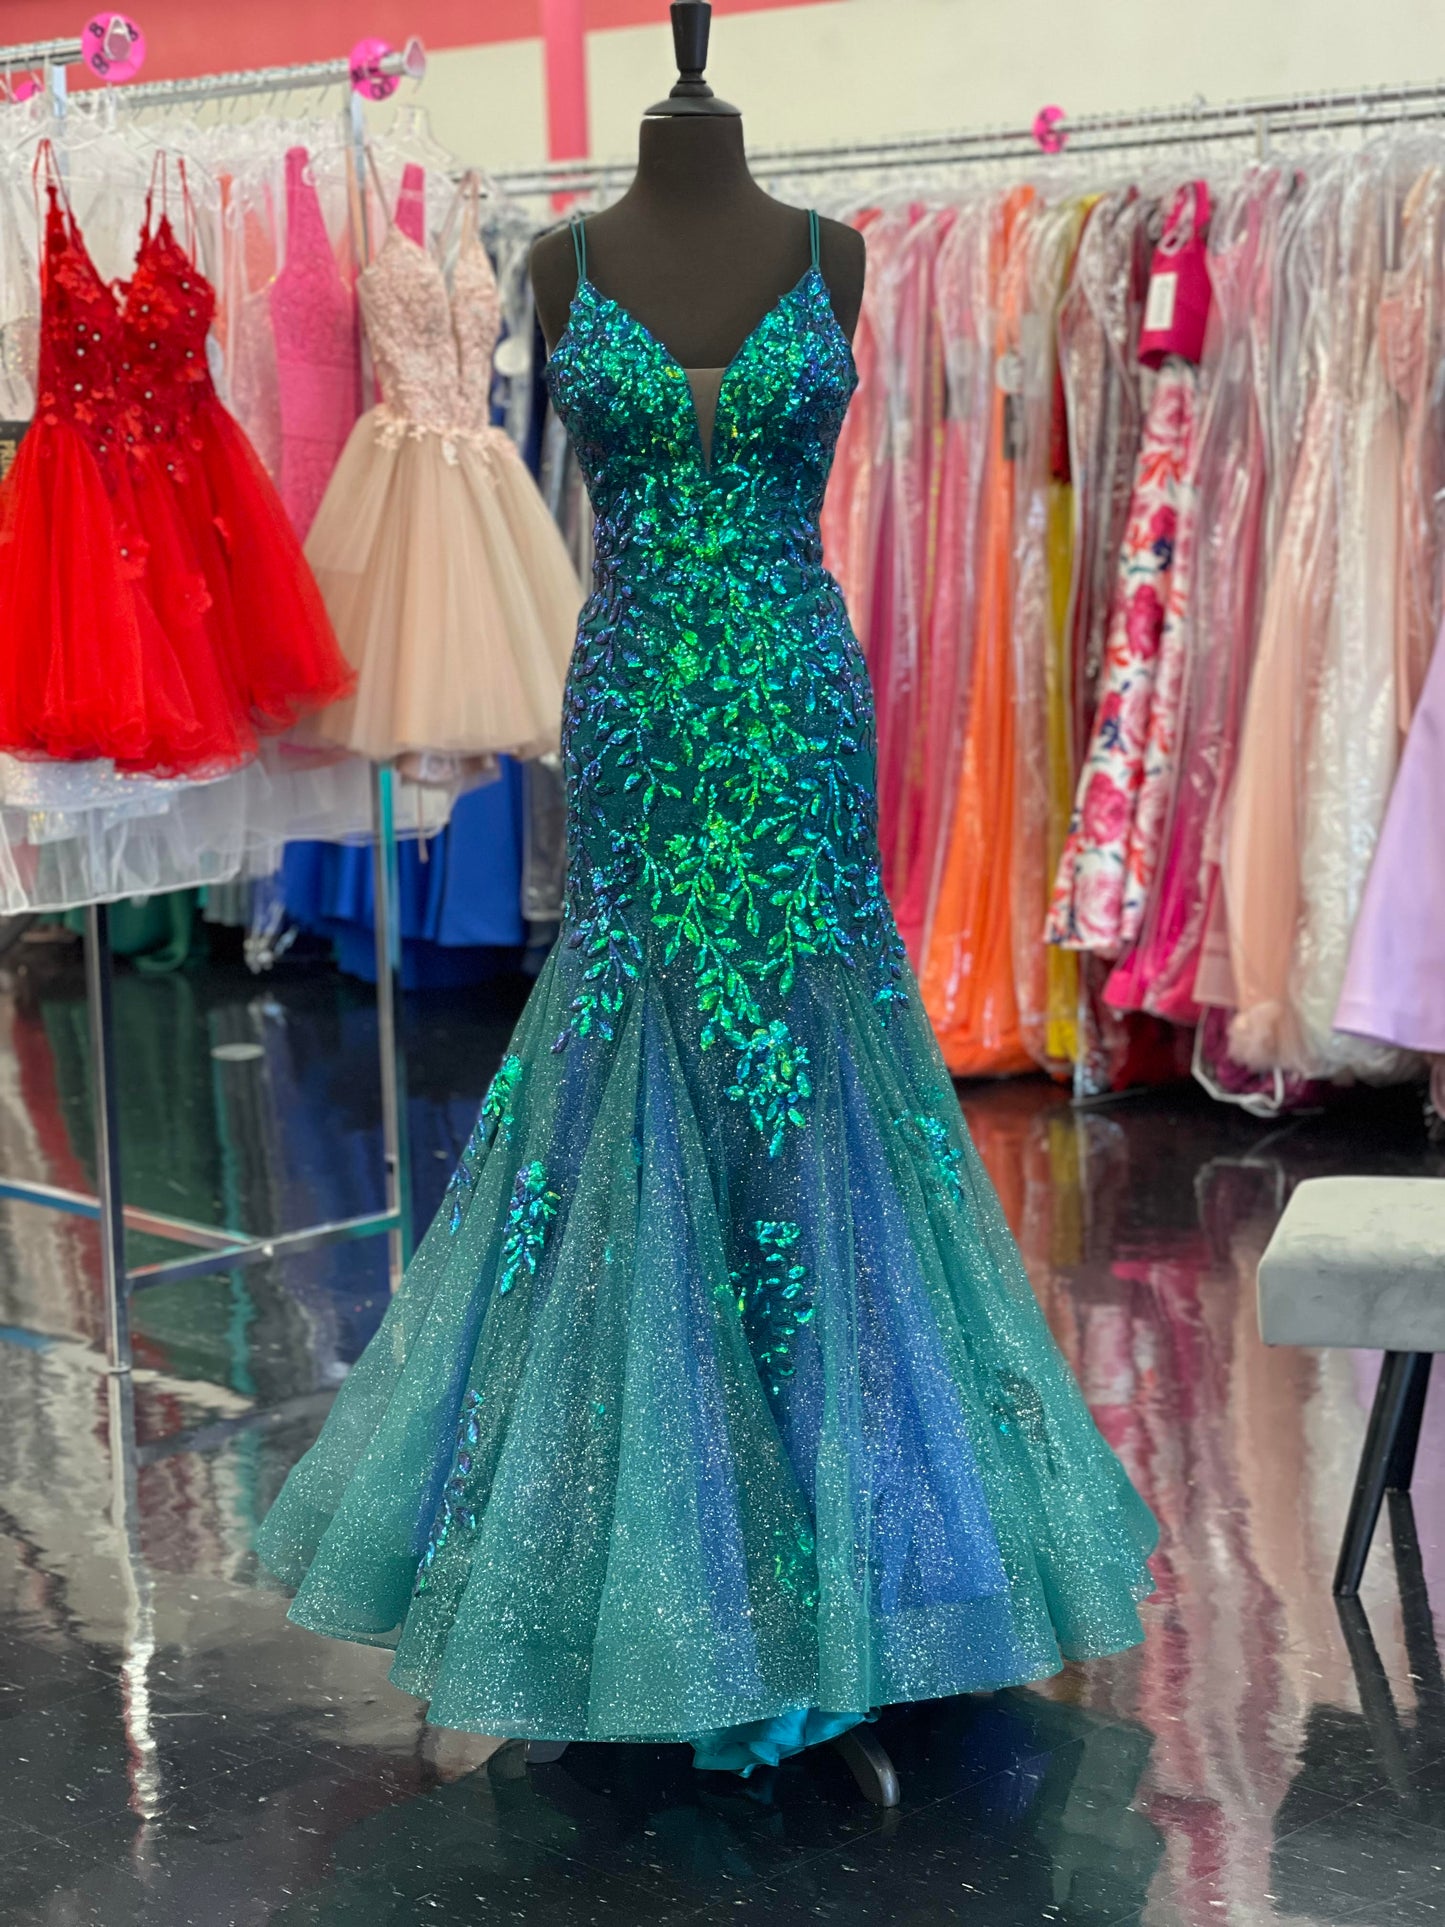 Amarra 87317 Long Embellished Lace Mermaid Prom Dress Backless Formal Gown Emerald